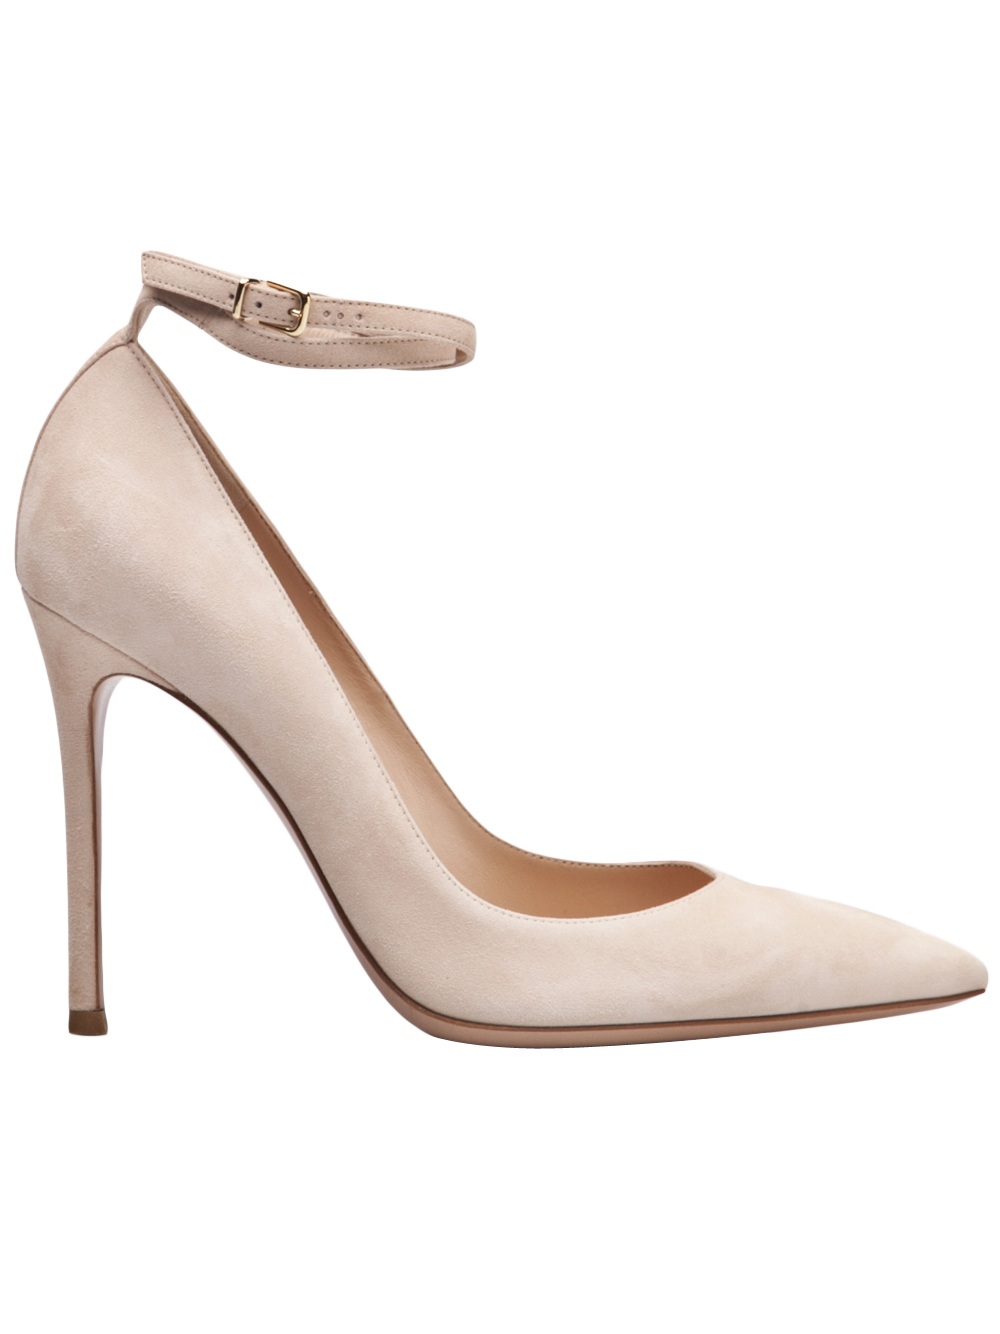 Gianvito Rossi Ankle Strap Pump in Nude (Natural) - Lyst